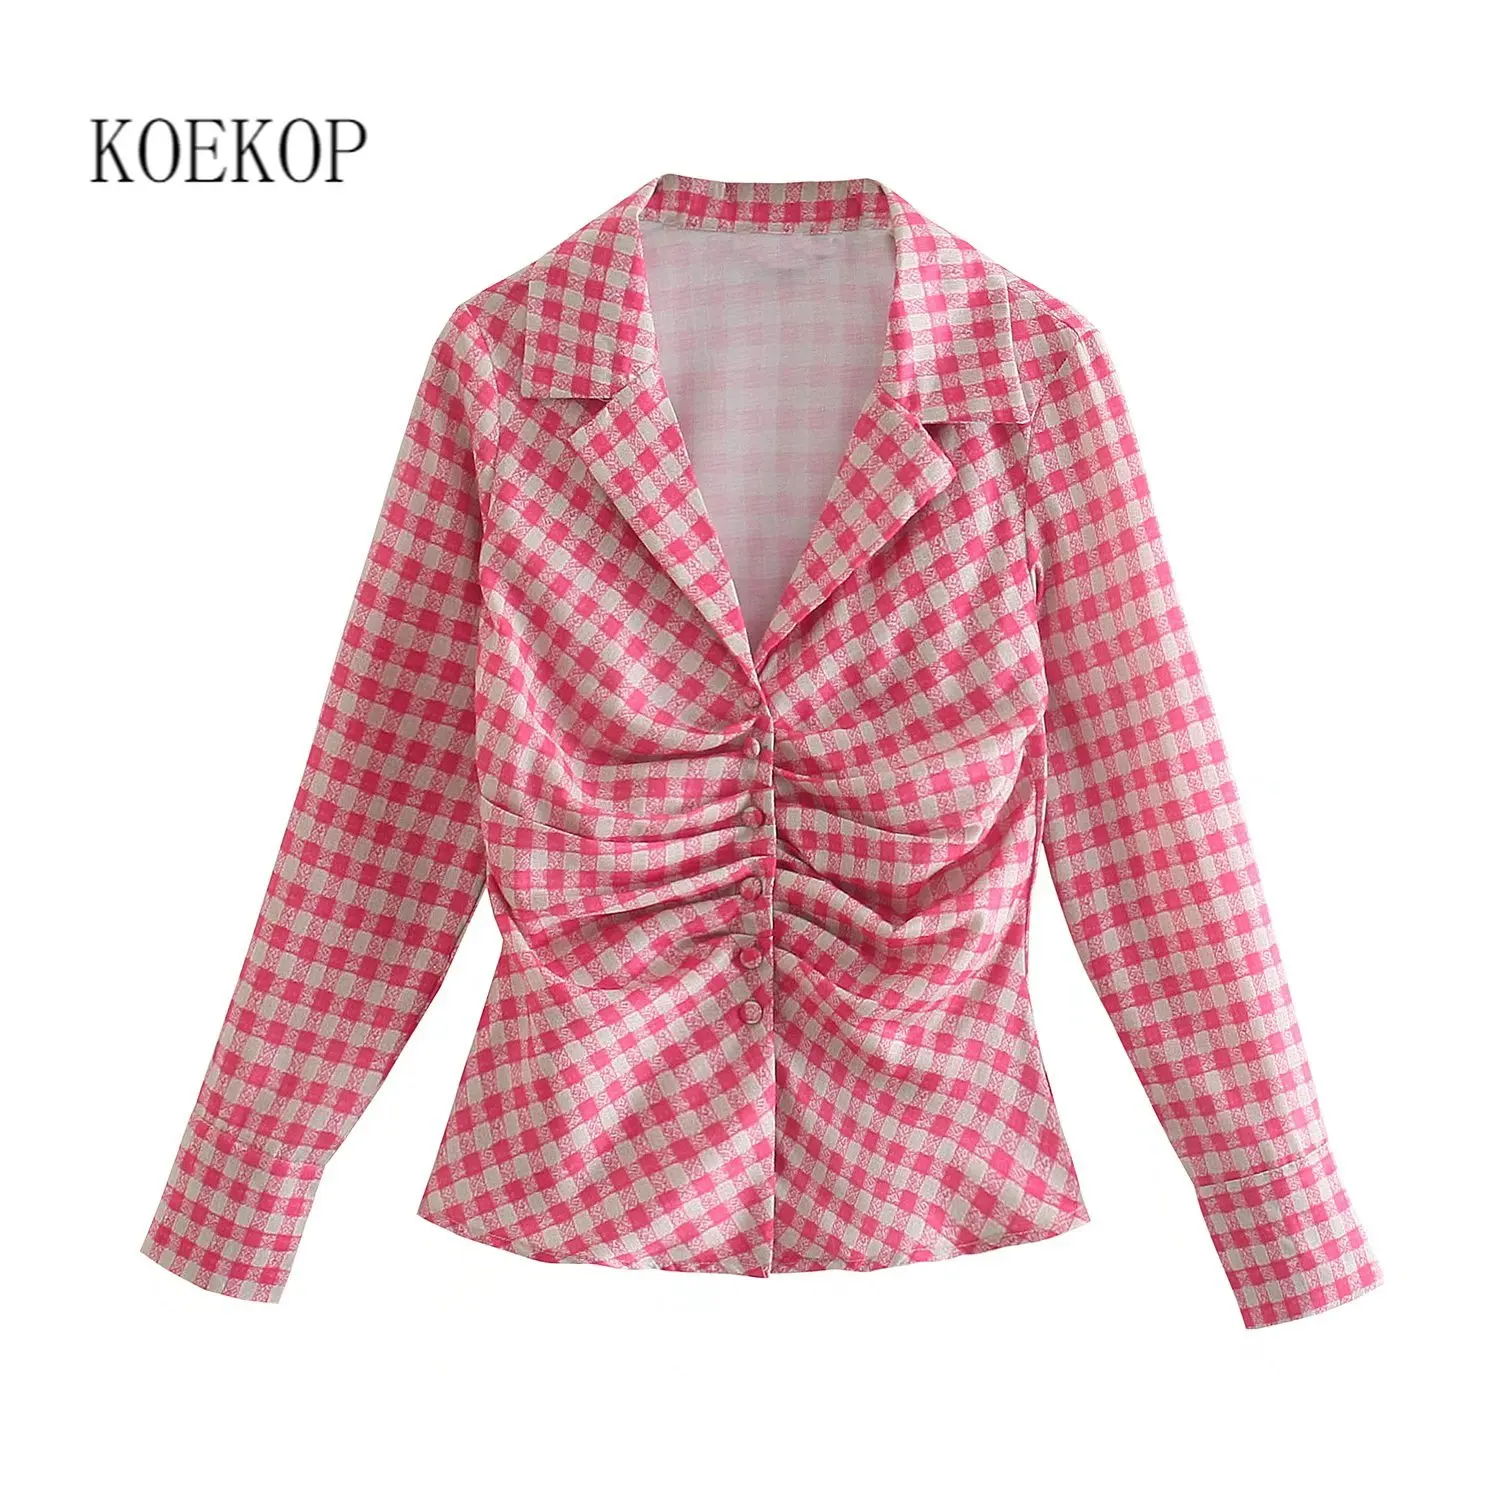 

Koekop Women Fashion Gathered Check Shirt V-neck with Lapel Collar Long Sleeves Chic Lady Pink Fitted Blouse Top Woman